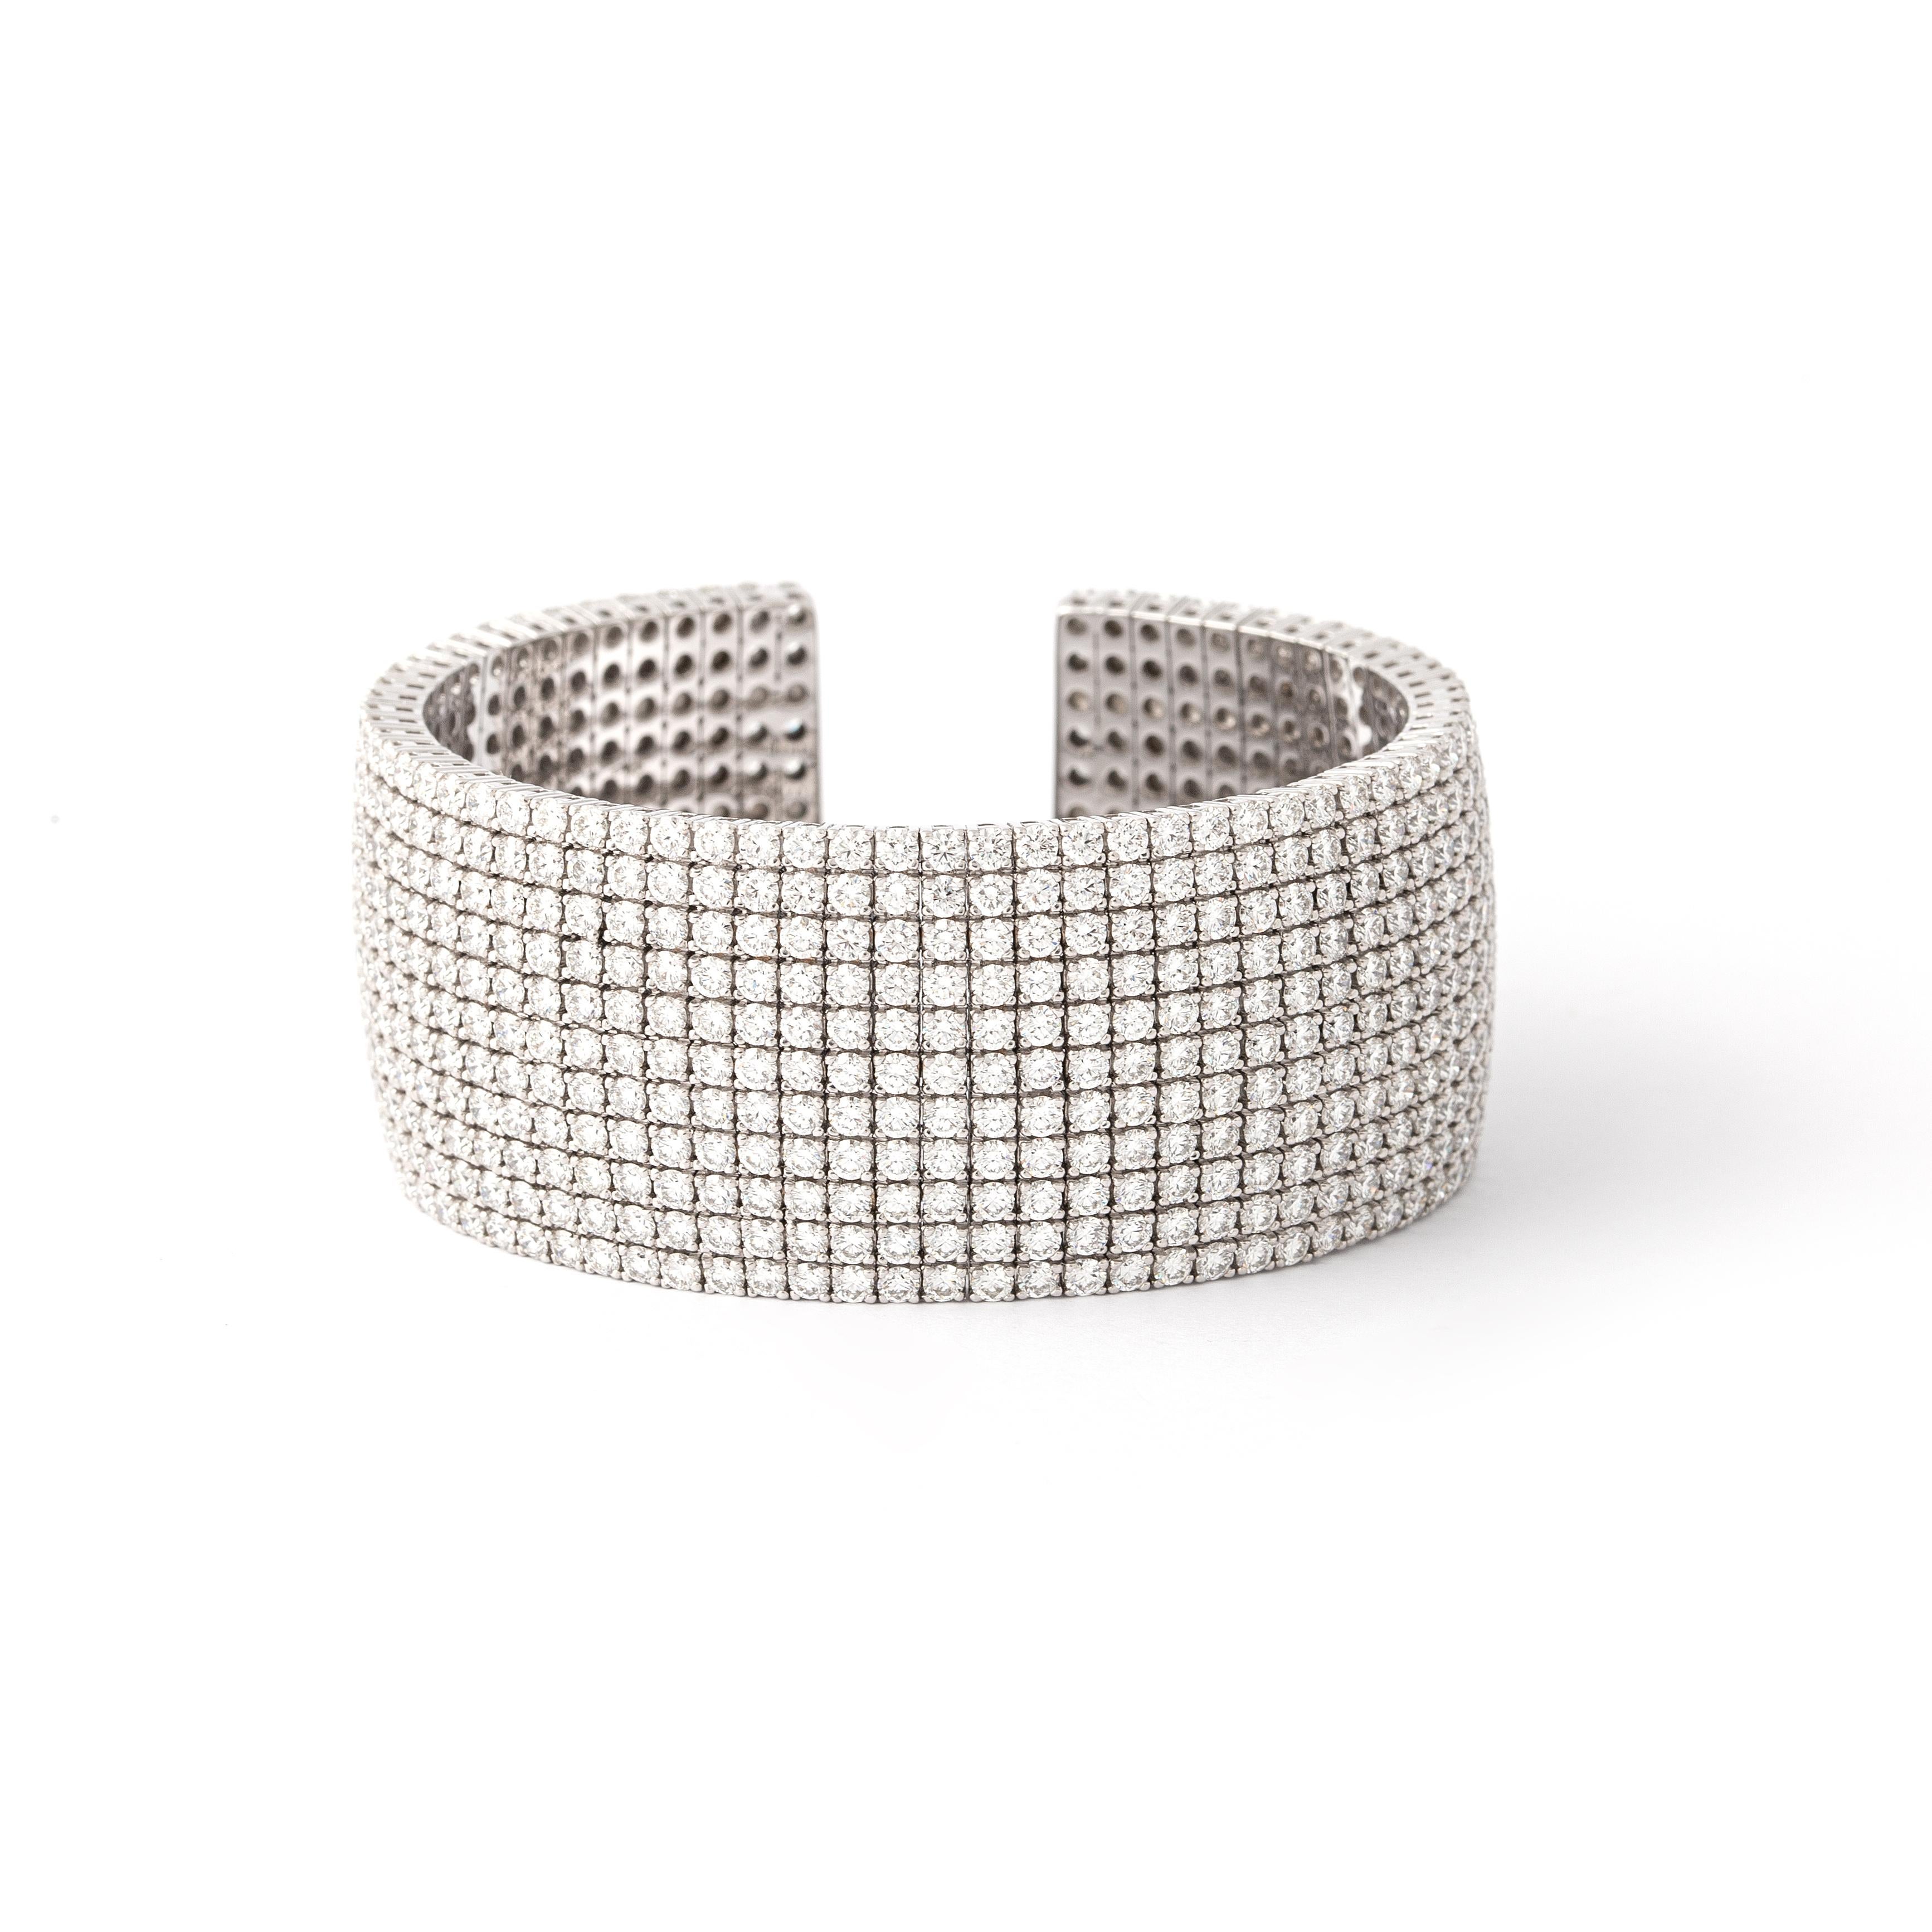 Bangle in 18kt white gold set with 715 diamonds 32.14 cts G VS1  

Inner circumference: Approximately 16.02 centimeters (6.31 inches) up to 17.27 centimeters (6.80 inches).

Note: Flexible Bracelet.

Total weight: 104.42 grams.

Width: 2.6